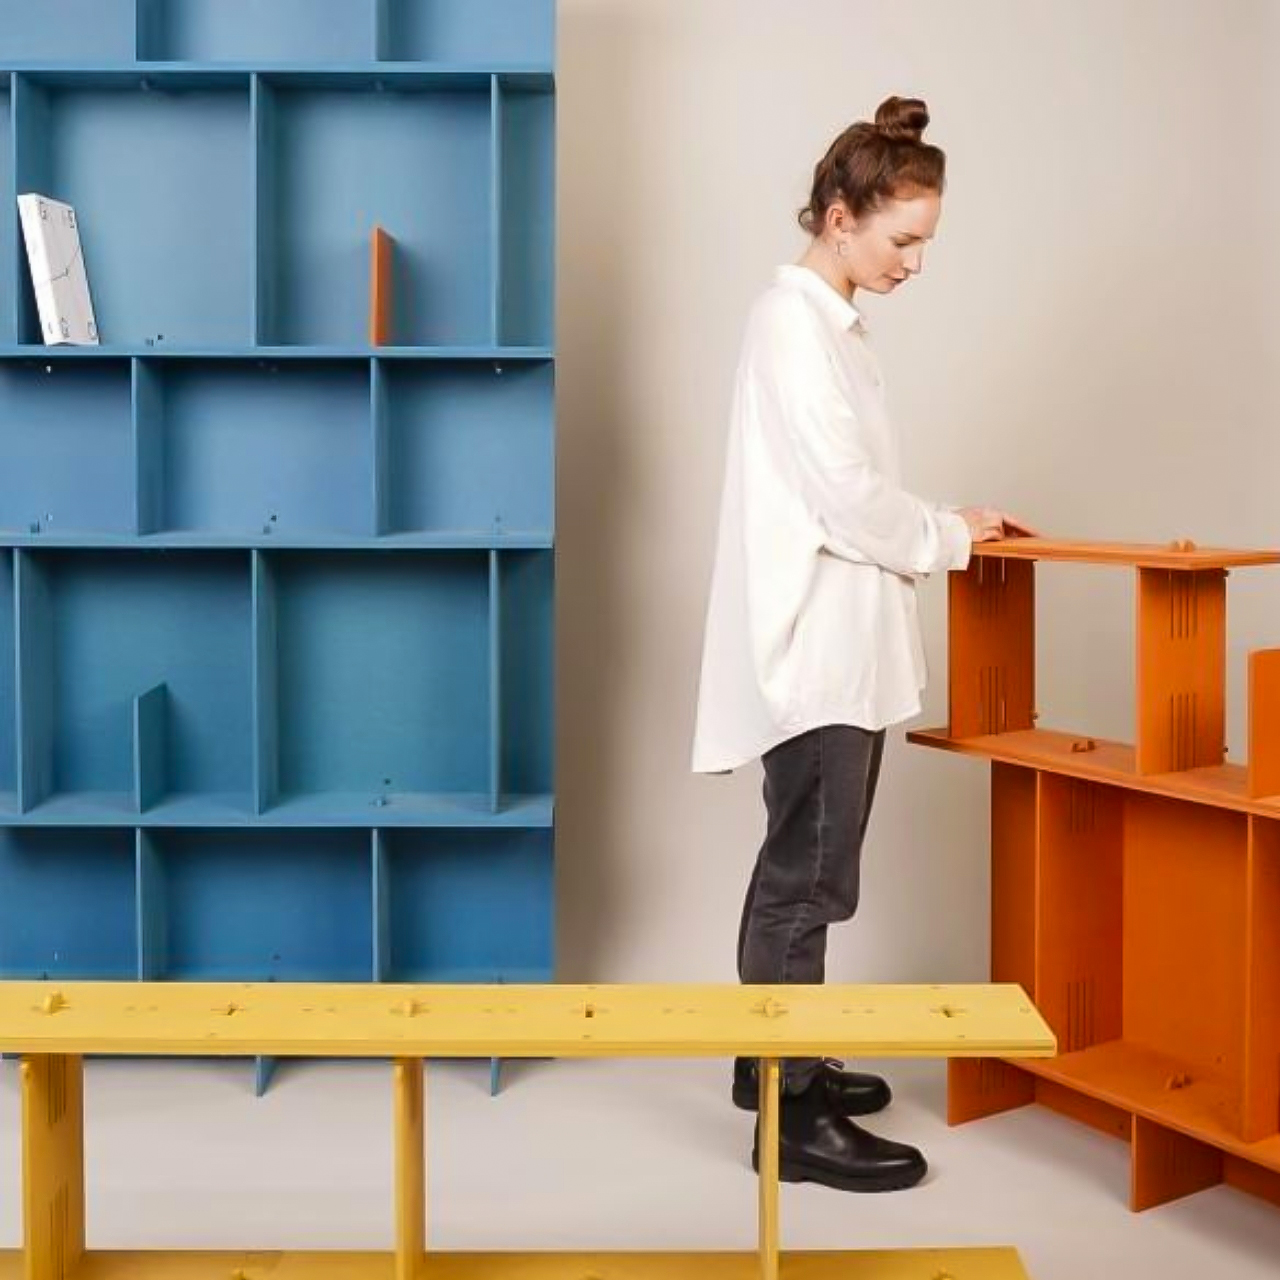 Create furniture with this experimental wooden clip system